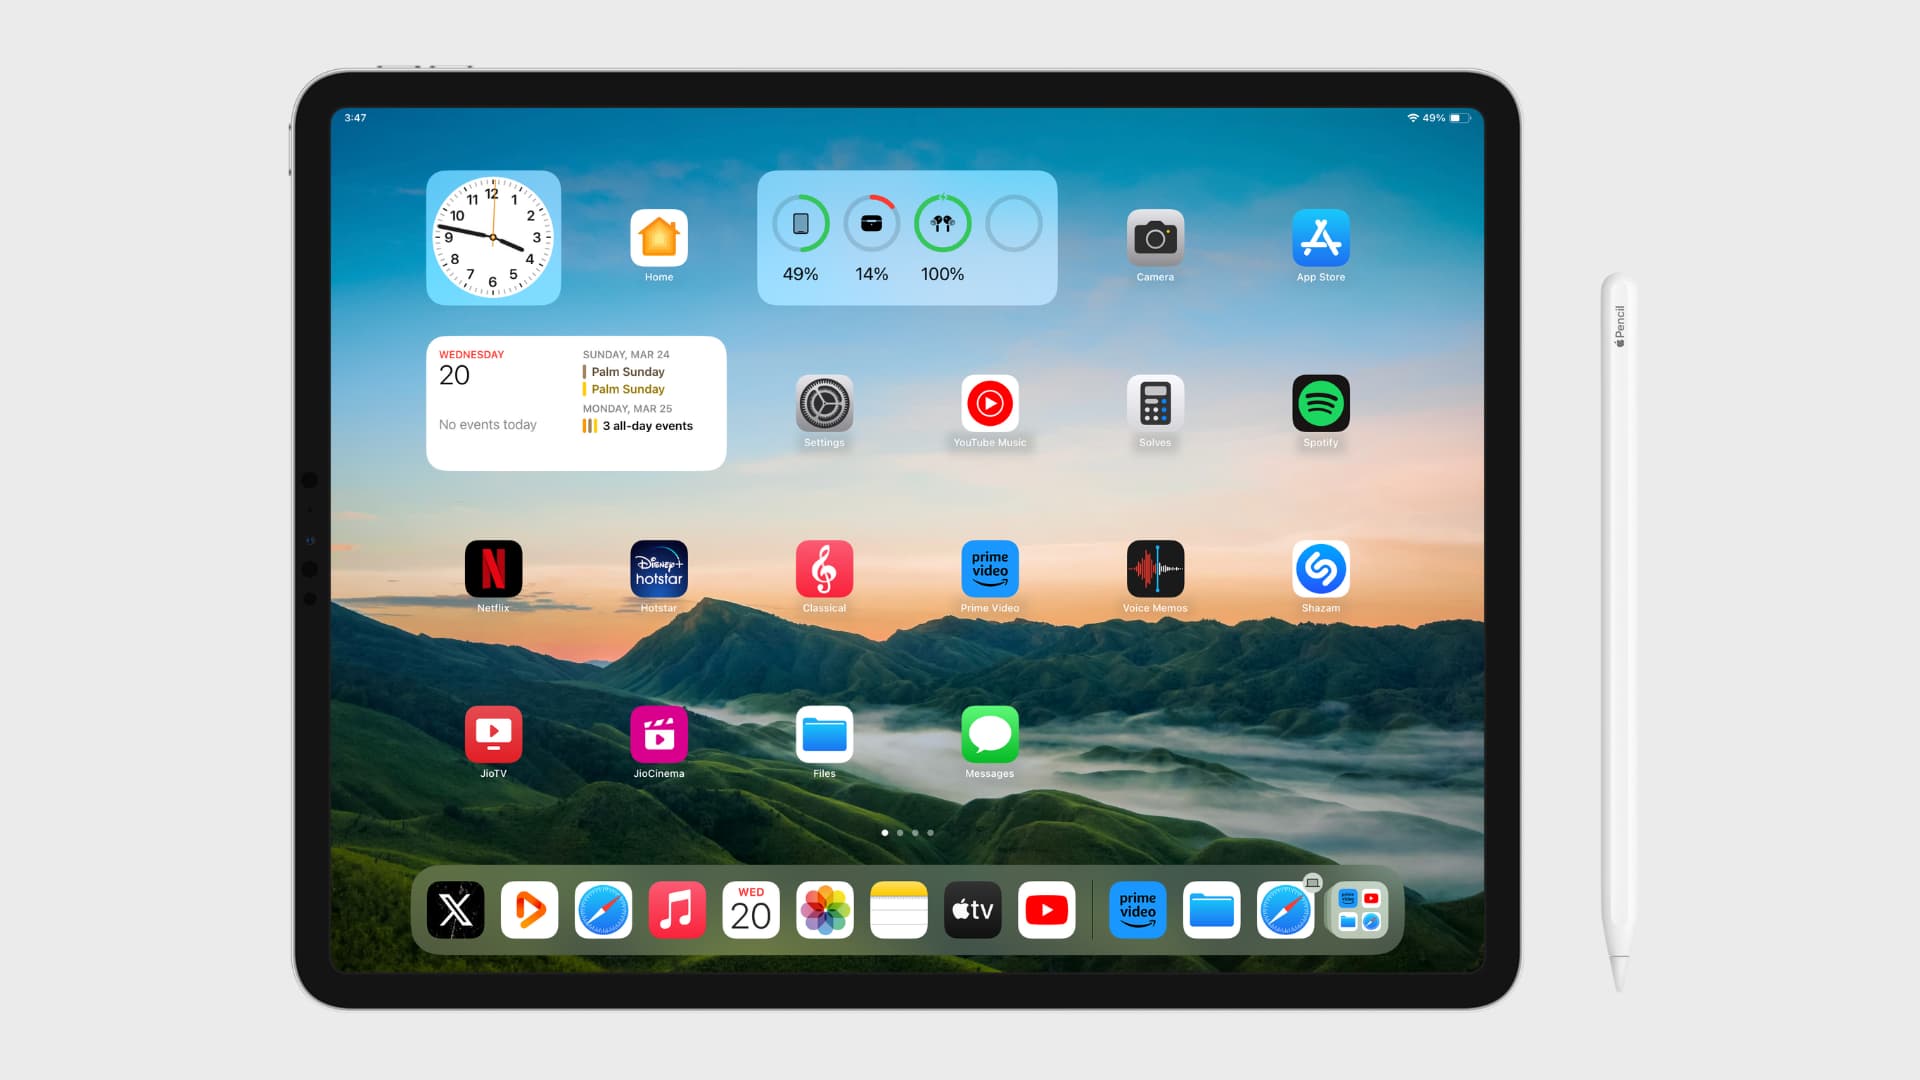 iPad Pro showing its Home Screen with an Apple Pencil next to it